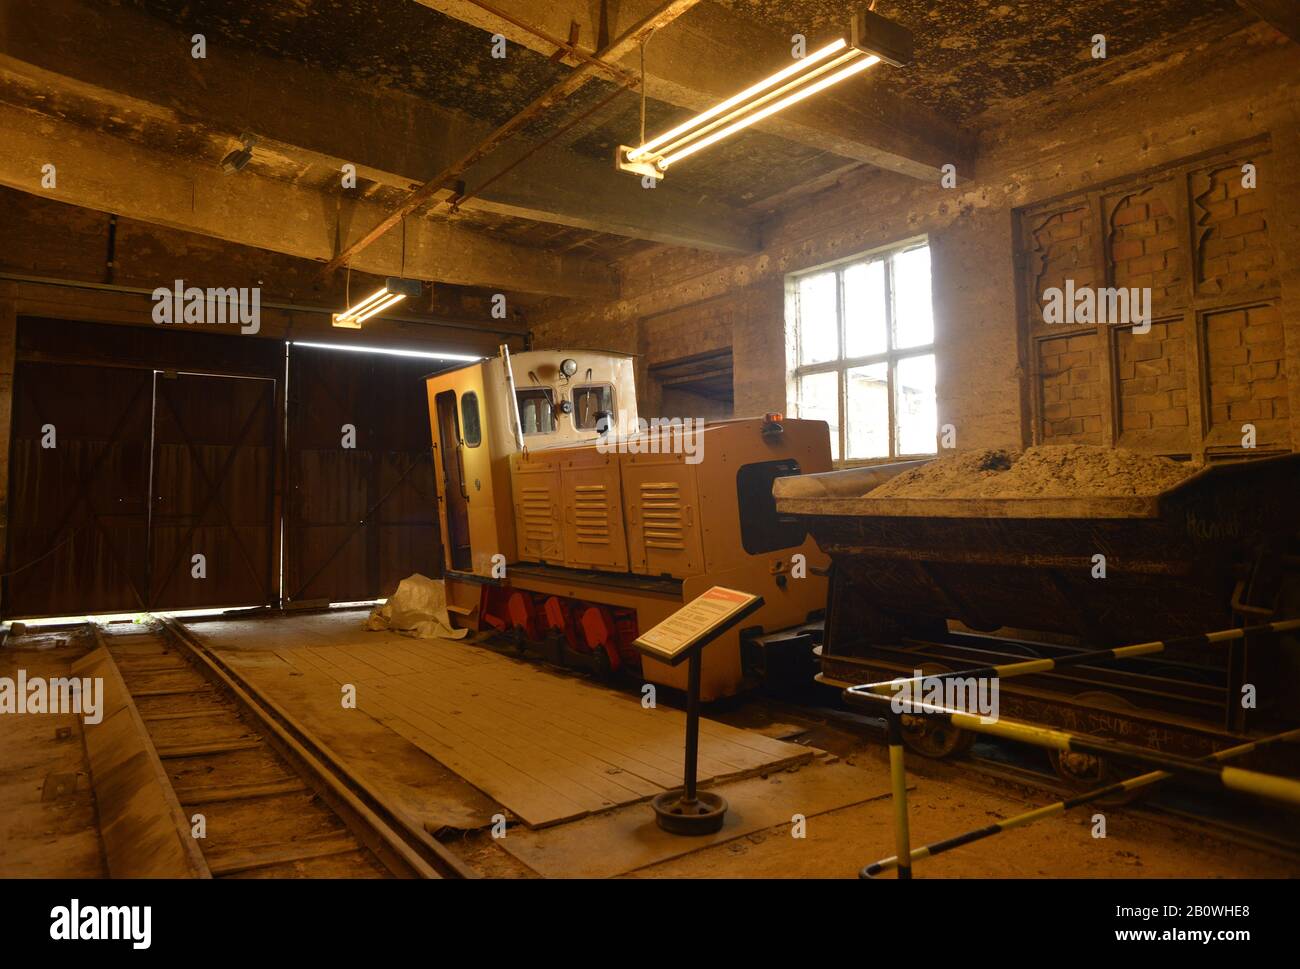 Mildenberg, Germany 08-16-2019 brickwork industry museum view inside a industry barack with an old train Stock Photo